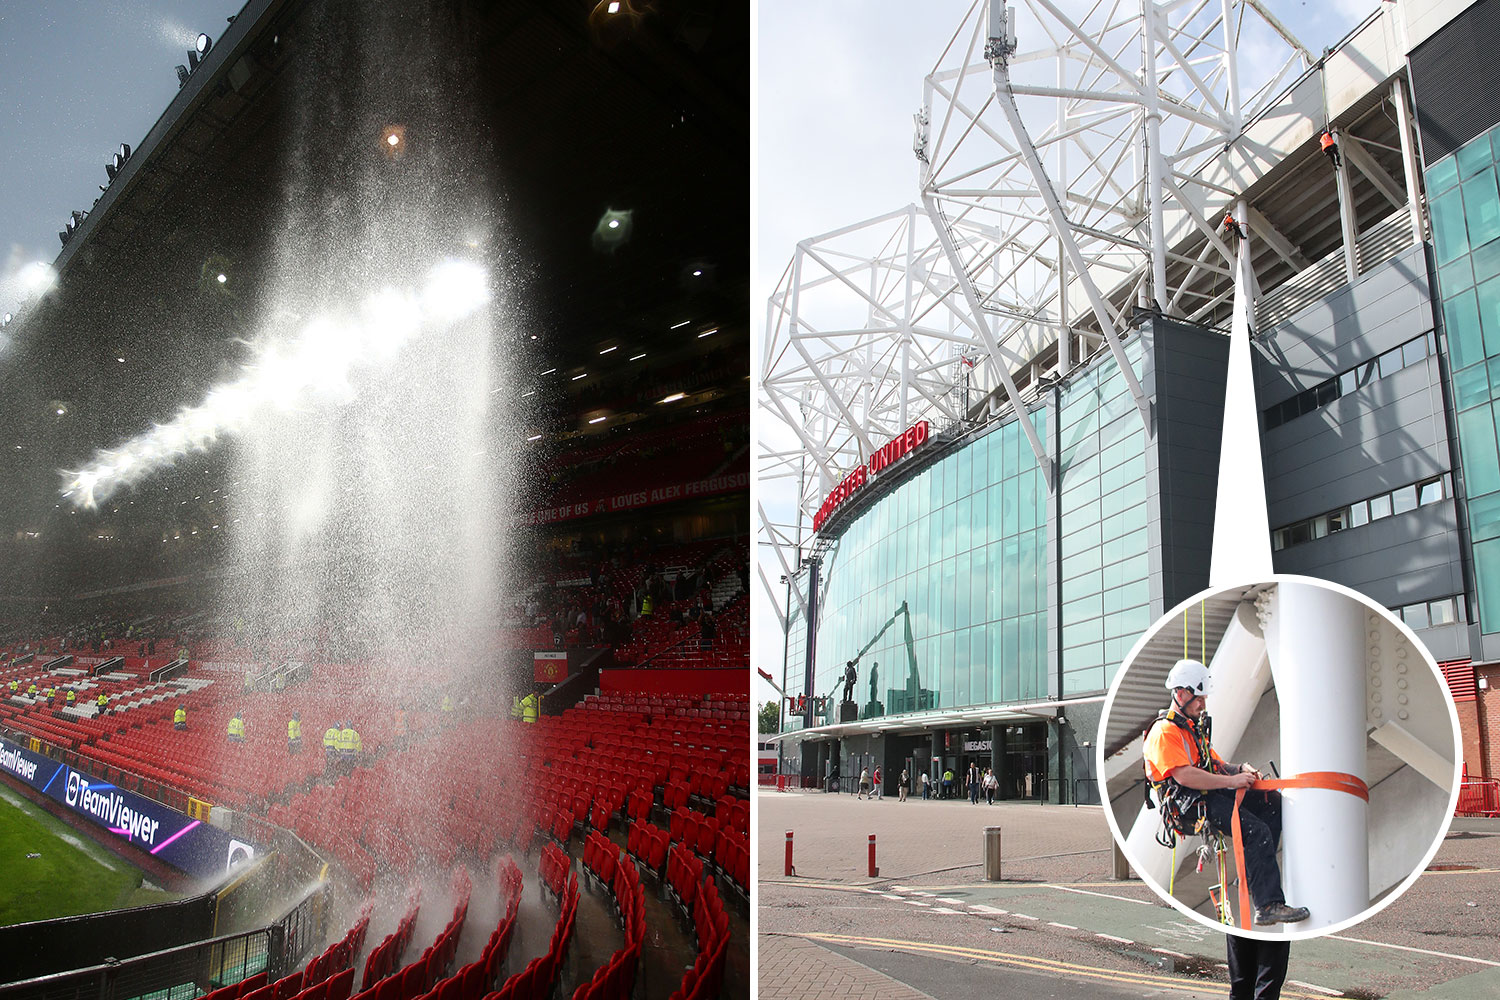 Workers start fixing Man Utd roof as 'leaking changing room' vid emerges